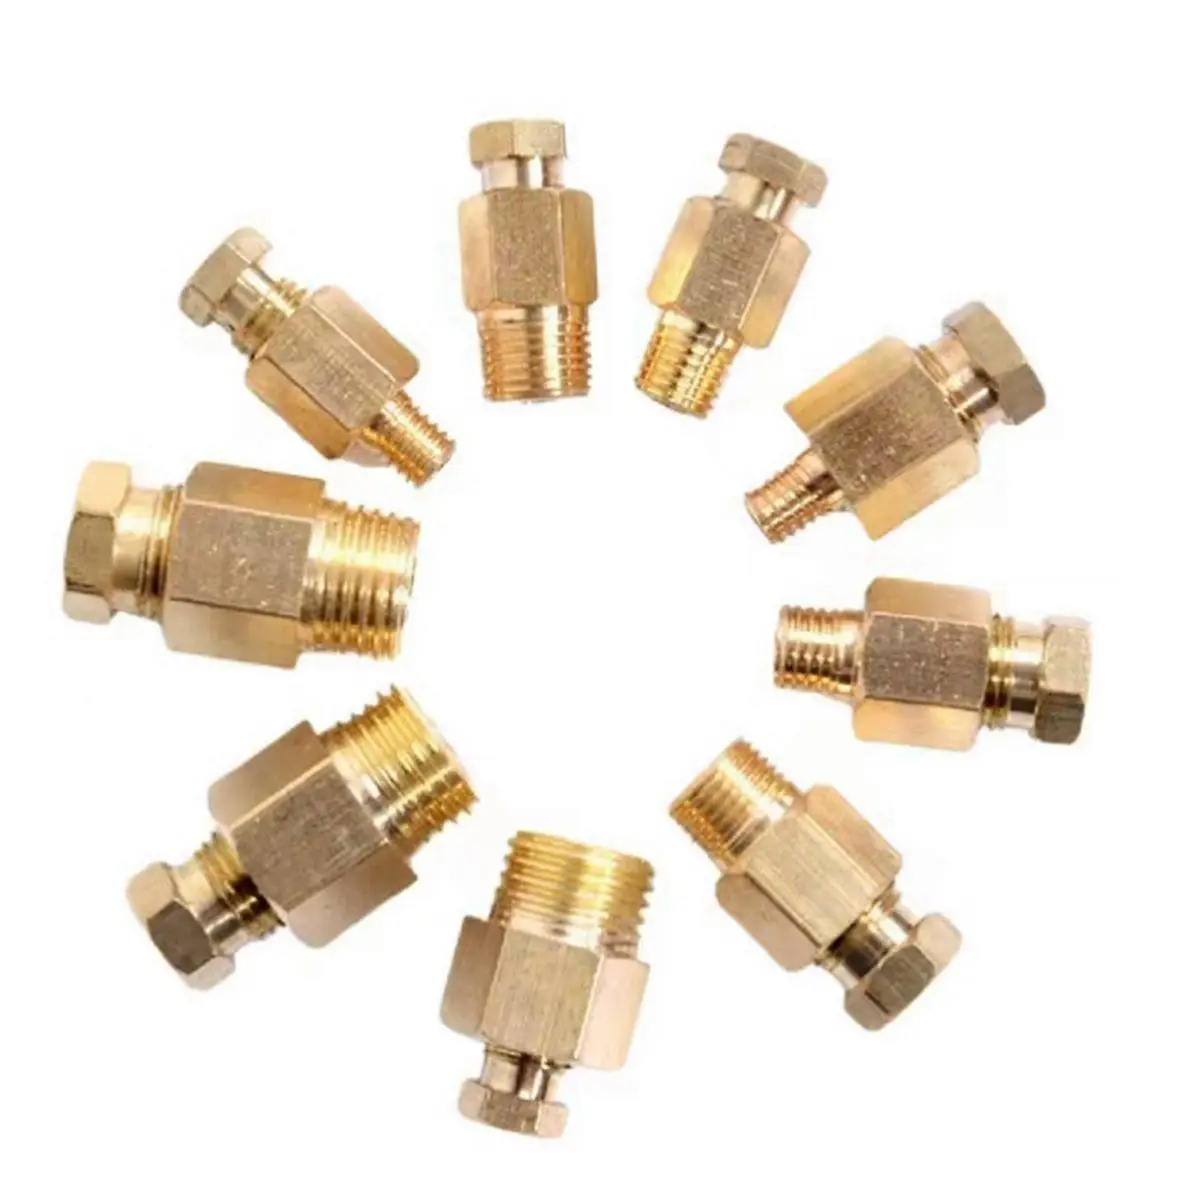 

LOT 5 Metric BSPP Thread Male - Fit Tube O.D 4/6/8/10mm Hex Brass Oil Pipe Fitting For Tubing Manifold Block